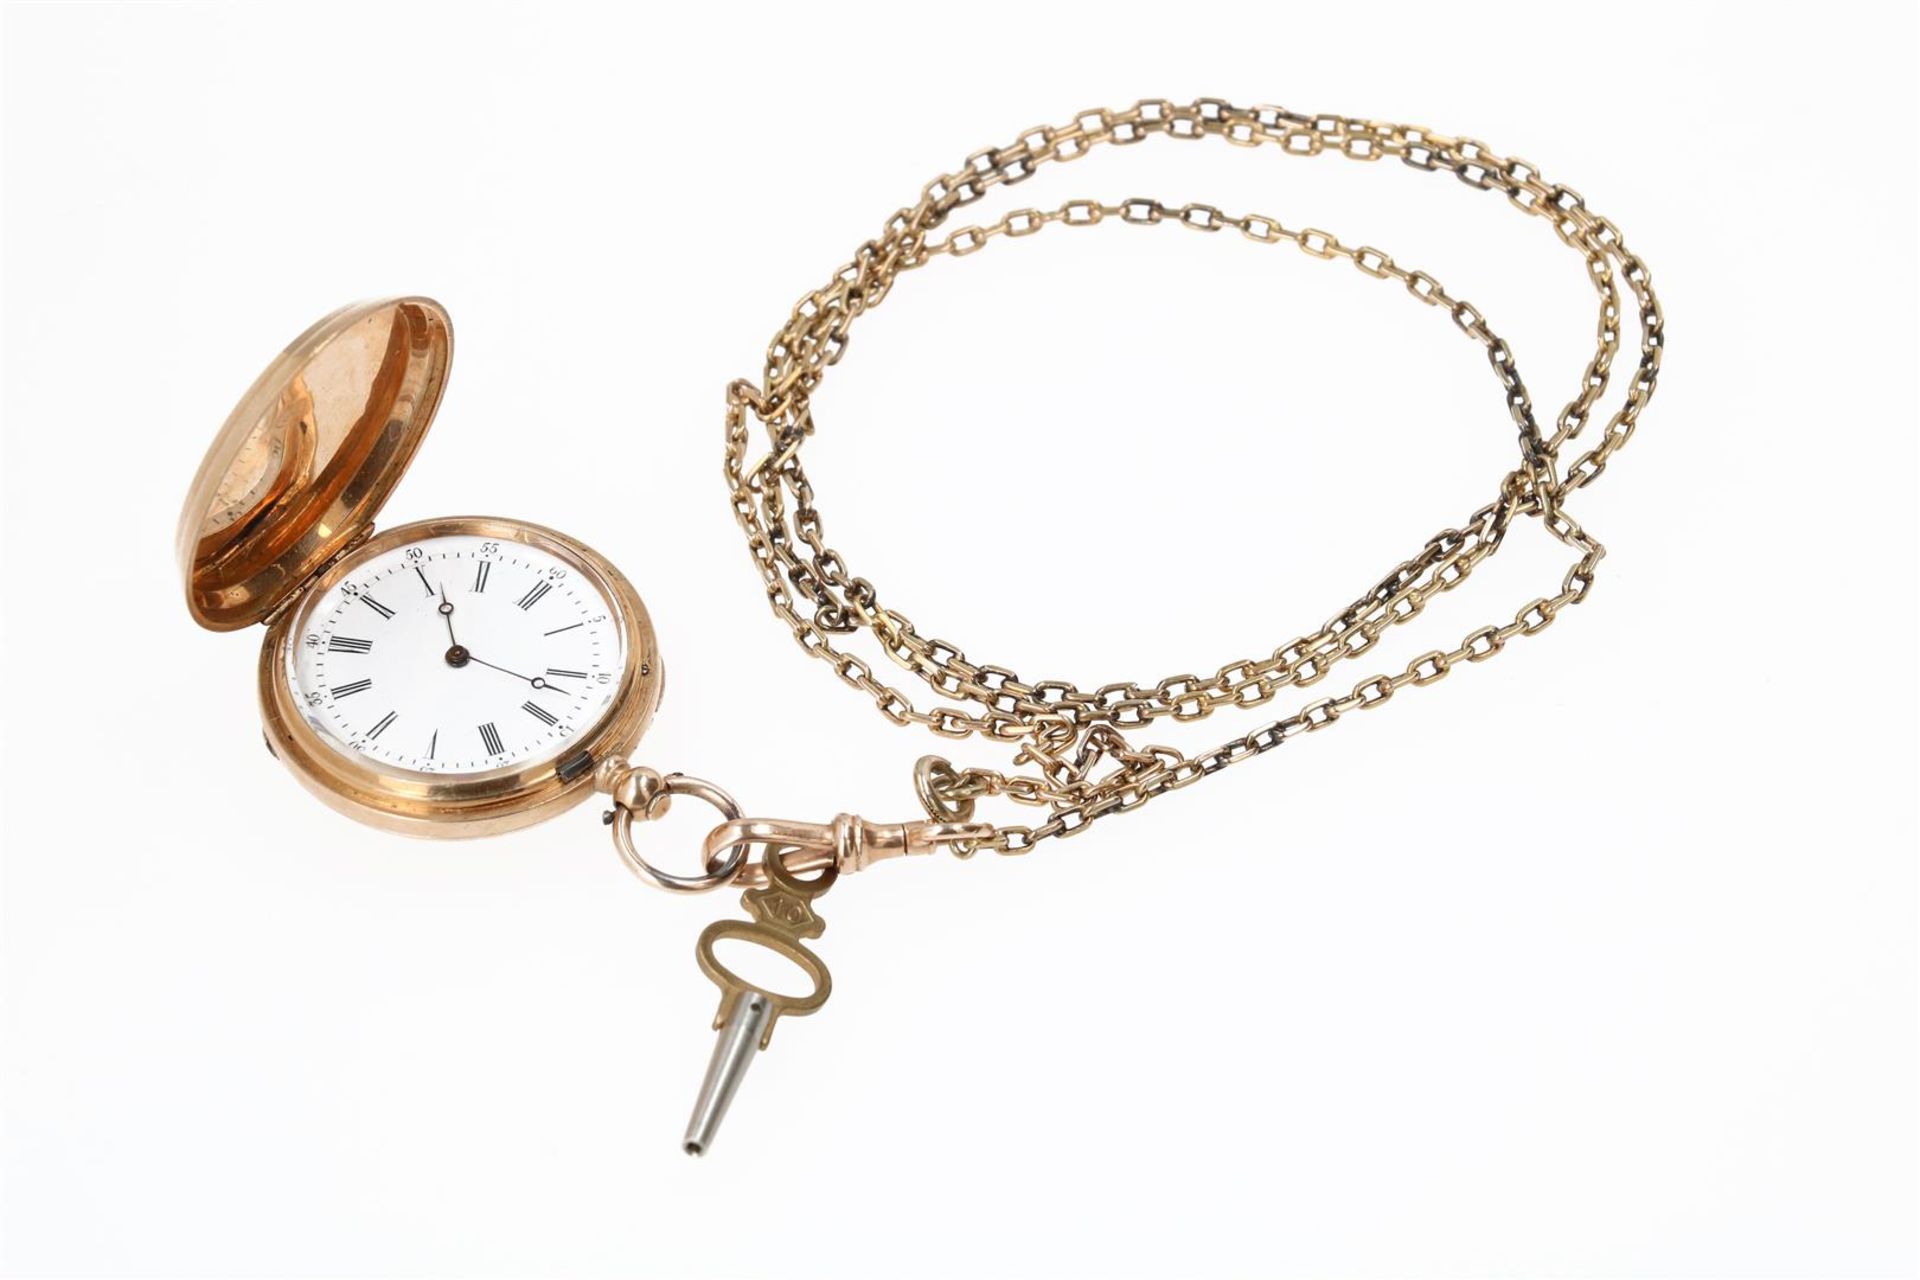 A 14-kt gold ladies remontoir pocket watch on a gold chain, Peret et fils, the engraved case with mo - Image 2 of 9